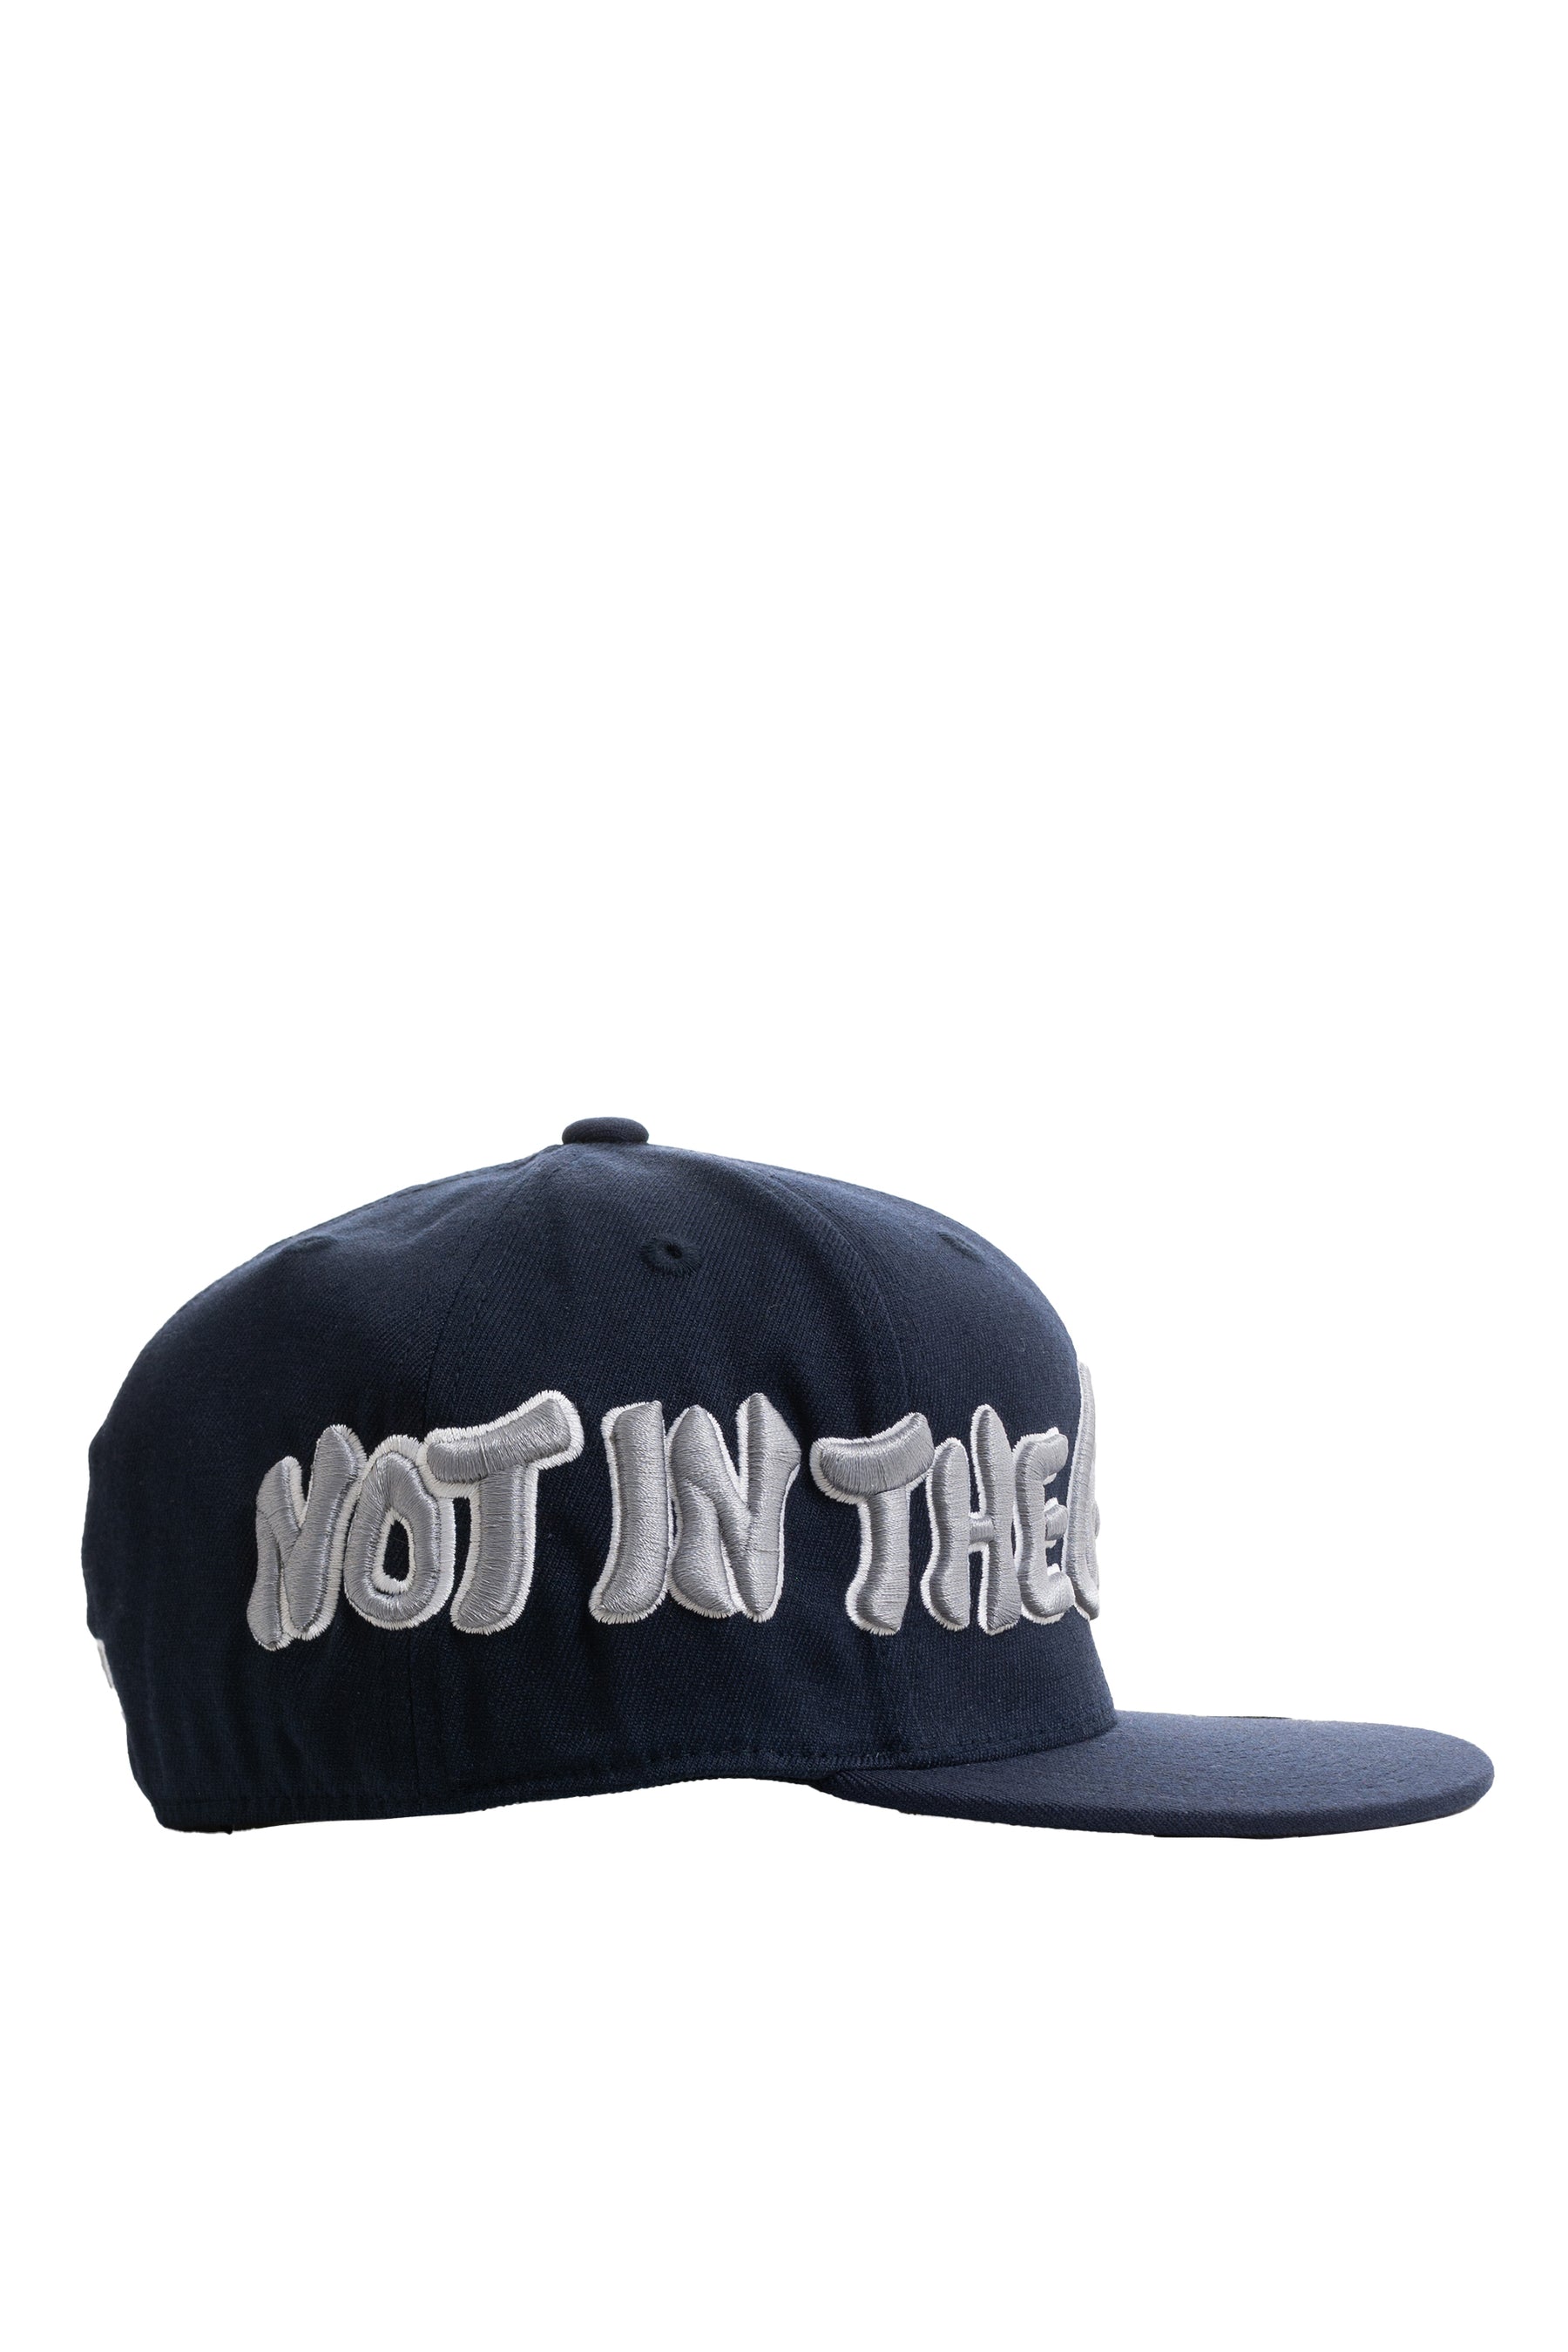 MS FITTED CAP / NVY WHT